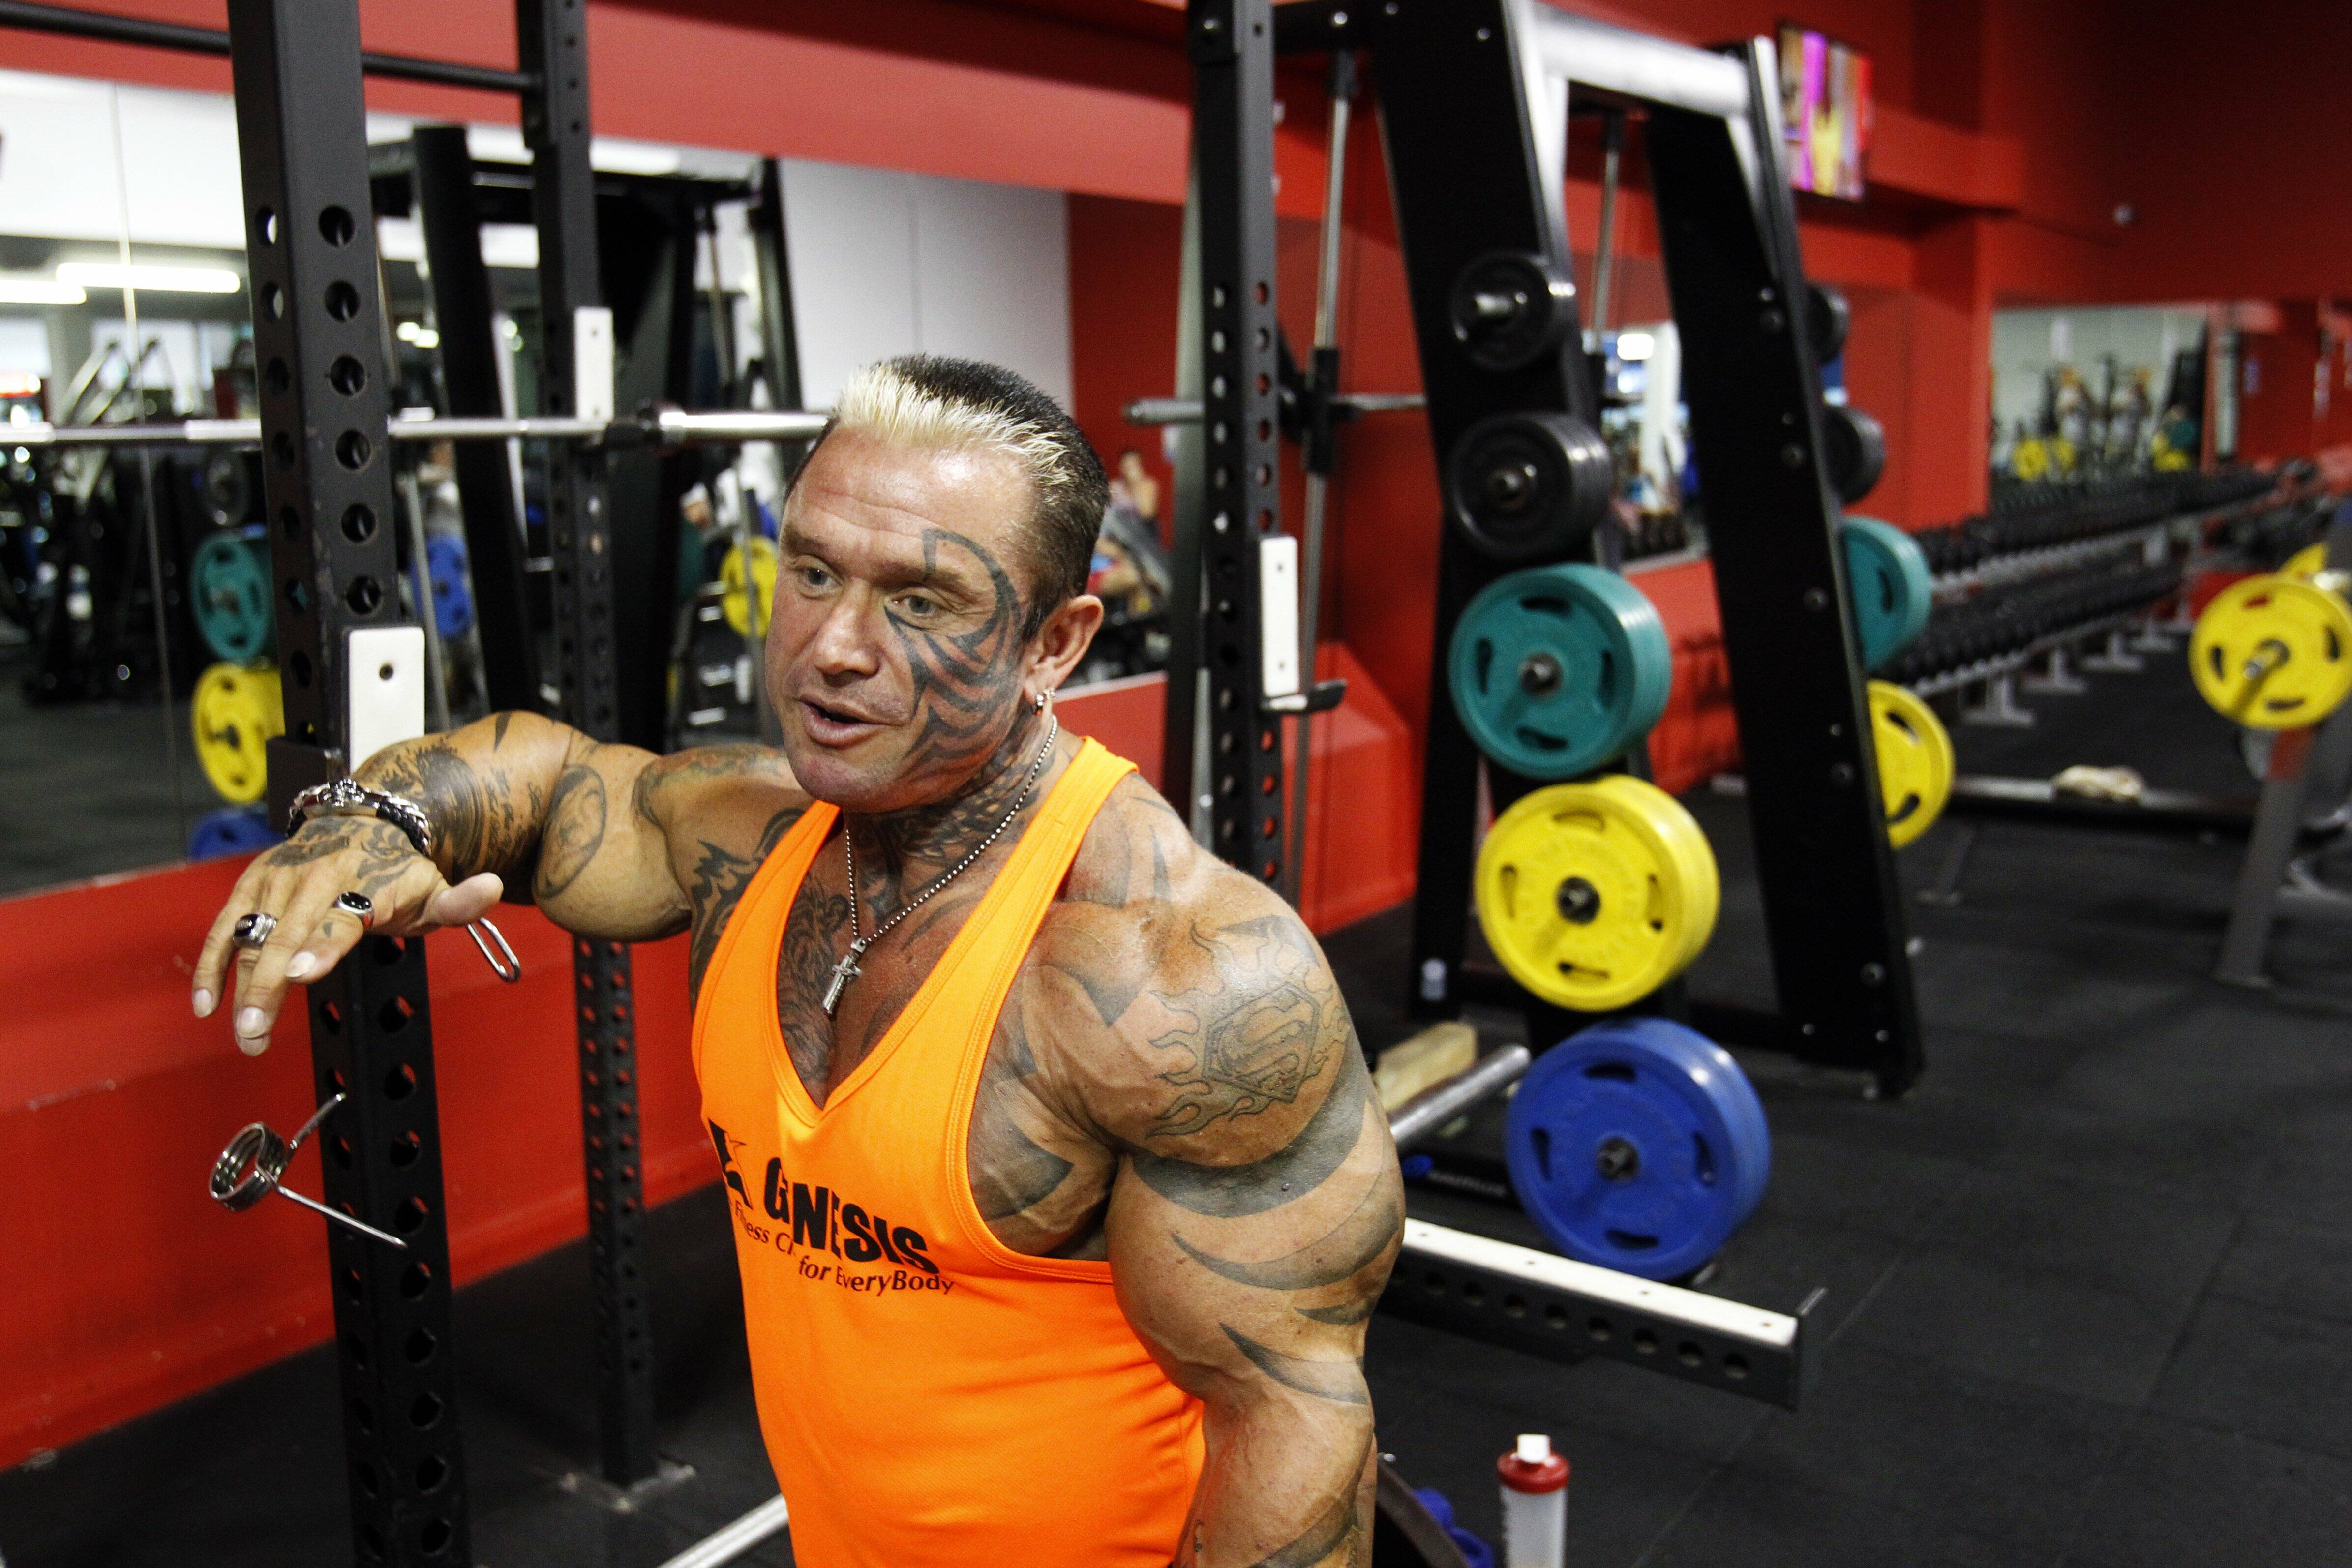 Mr Universe gets face tattoo removed | Newcastle Herald | Newcastle, NSW